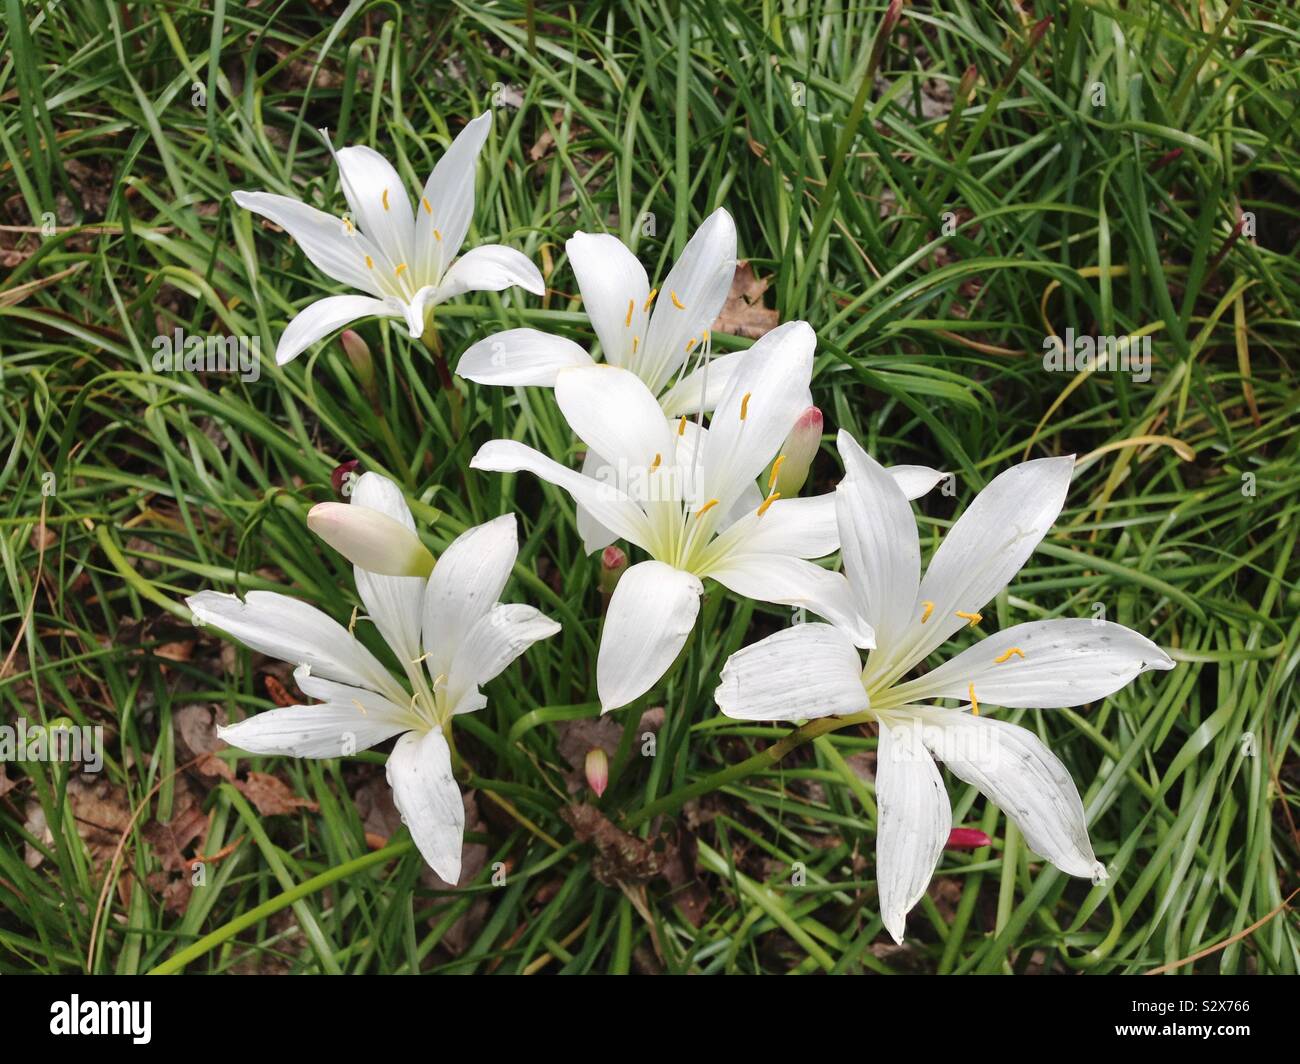 A bunch of white colored flowers called Atamasco Lily or Rain Lily are growing near the ocean in Myrtle Beach South Carolina. Zephyranthes atamasca are native to the southeastern United States. Stock Photo